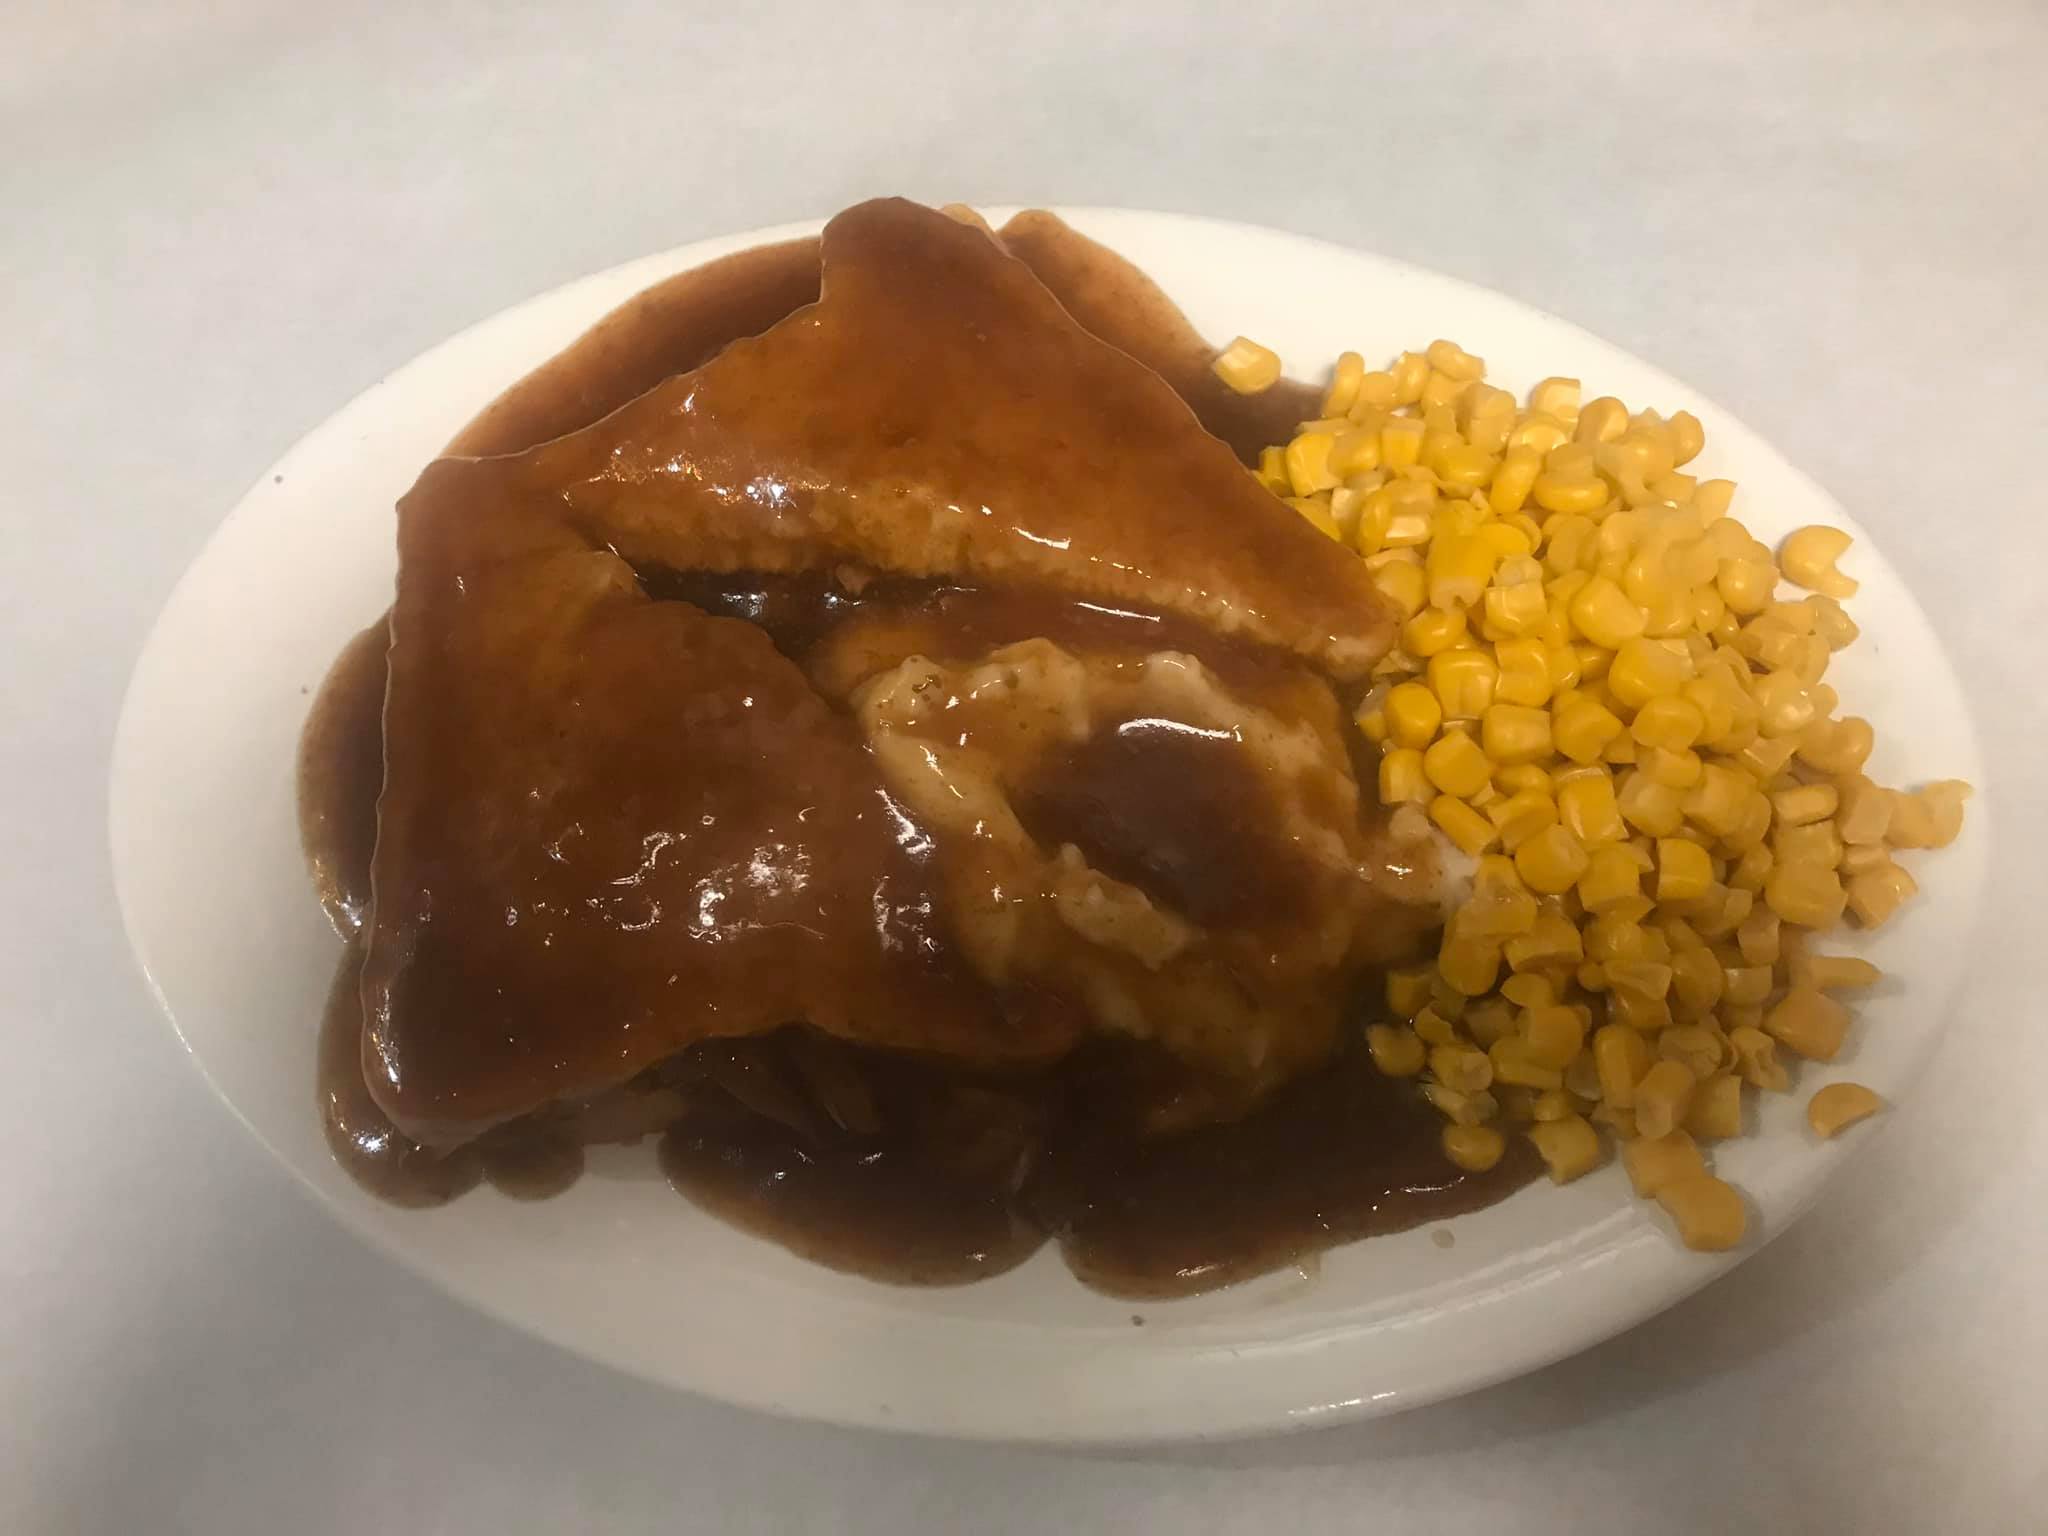 Corn and gravy covered beef from Clancy's Keg in Downtown Cedar Rapids